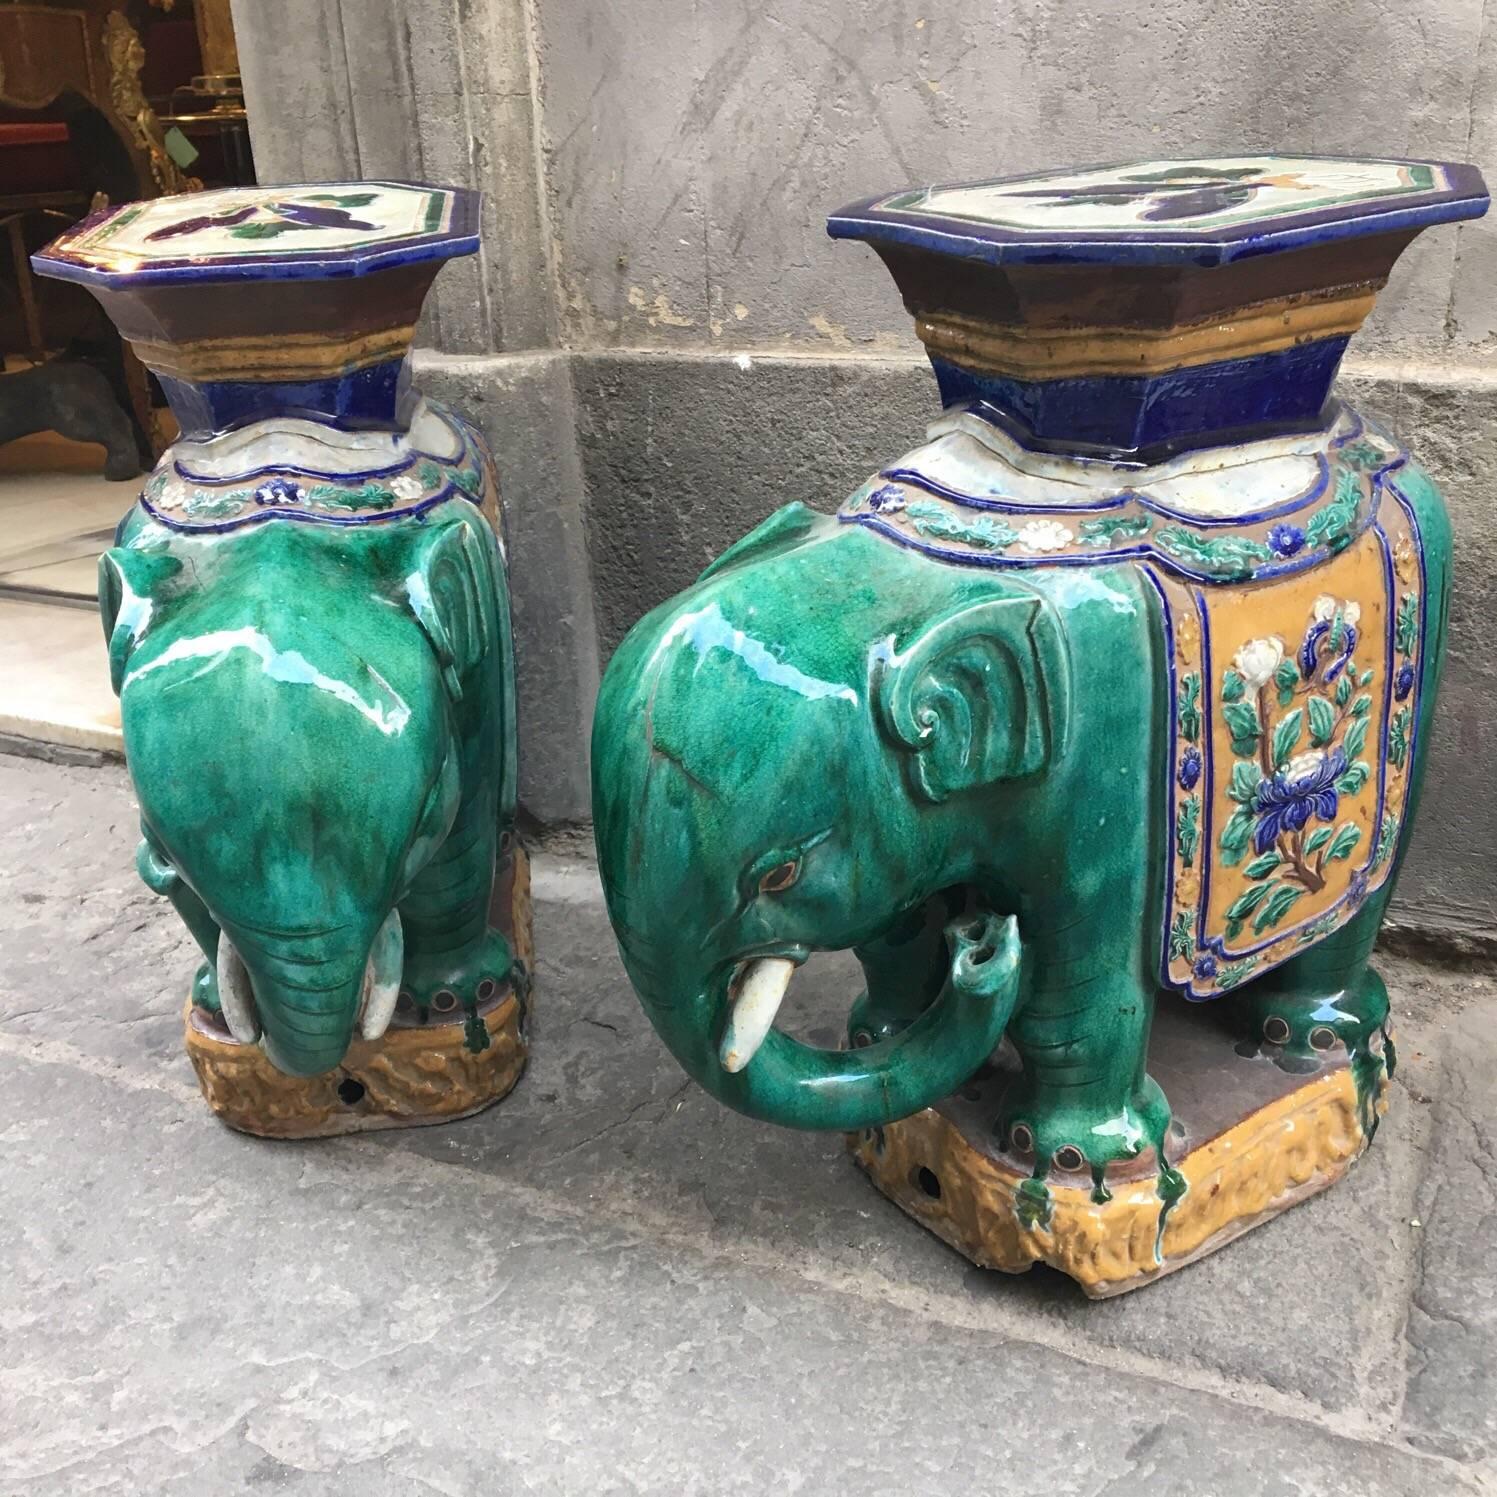 Pair of Vietnamese ceramic vintage elephant tables / garden plant stands. Excellent condition and made of ceramic porcelain. Vivid colors and details; they even have nose holes in the elephants' trunks.
These are great for indoor and outdoor use.